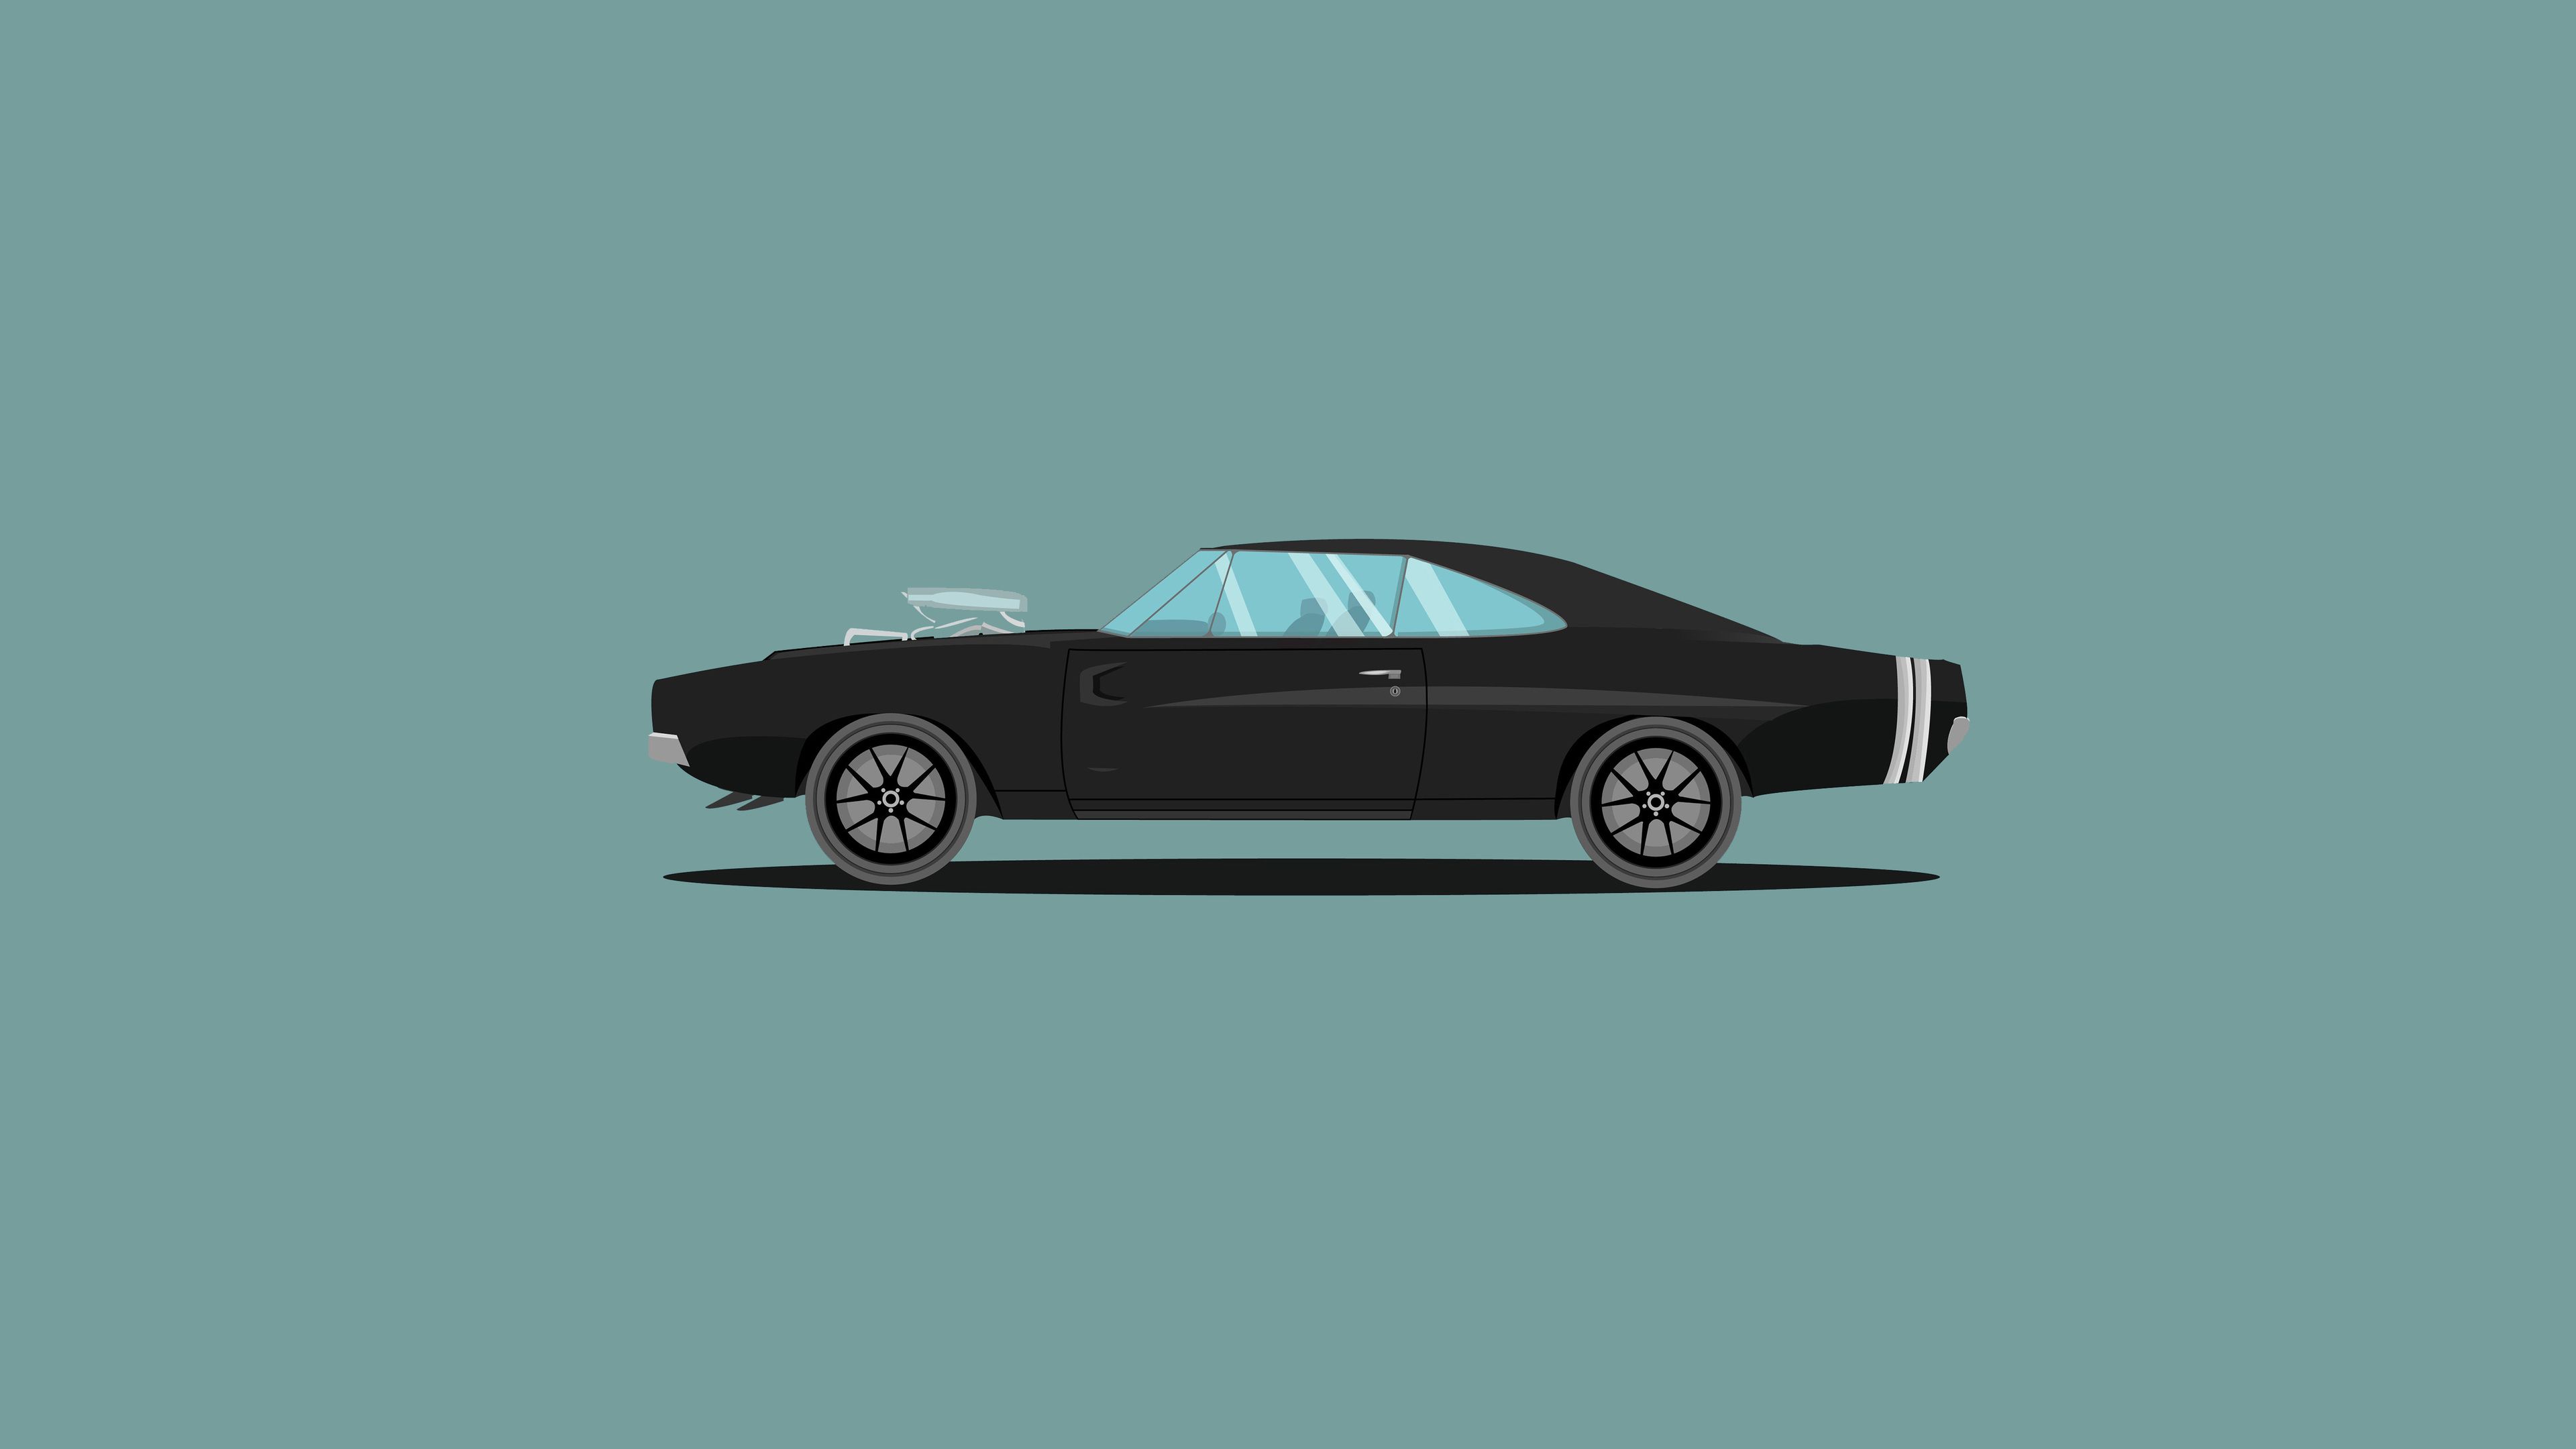 Wallpaper 4k 1970 Dodge Charger Fast And Furious Edition Illustration 4k Wallpaper, 5k Wallpaper, Artwork Wallpaper, Cars Wallpaper, Dodge Charger Wallpaper, Hd Wallpaper